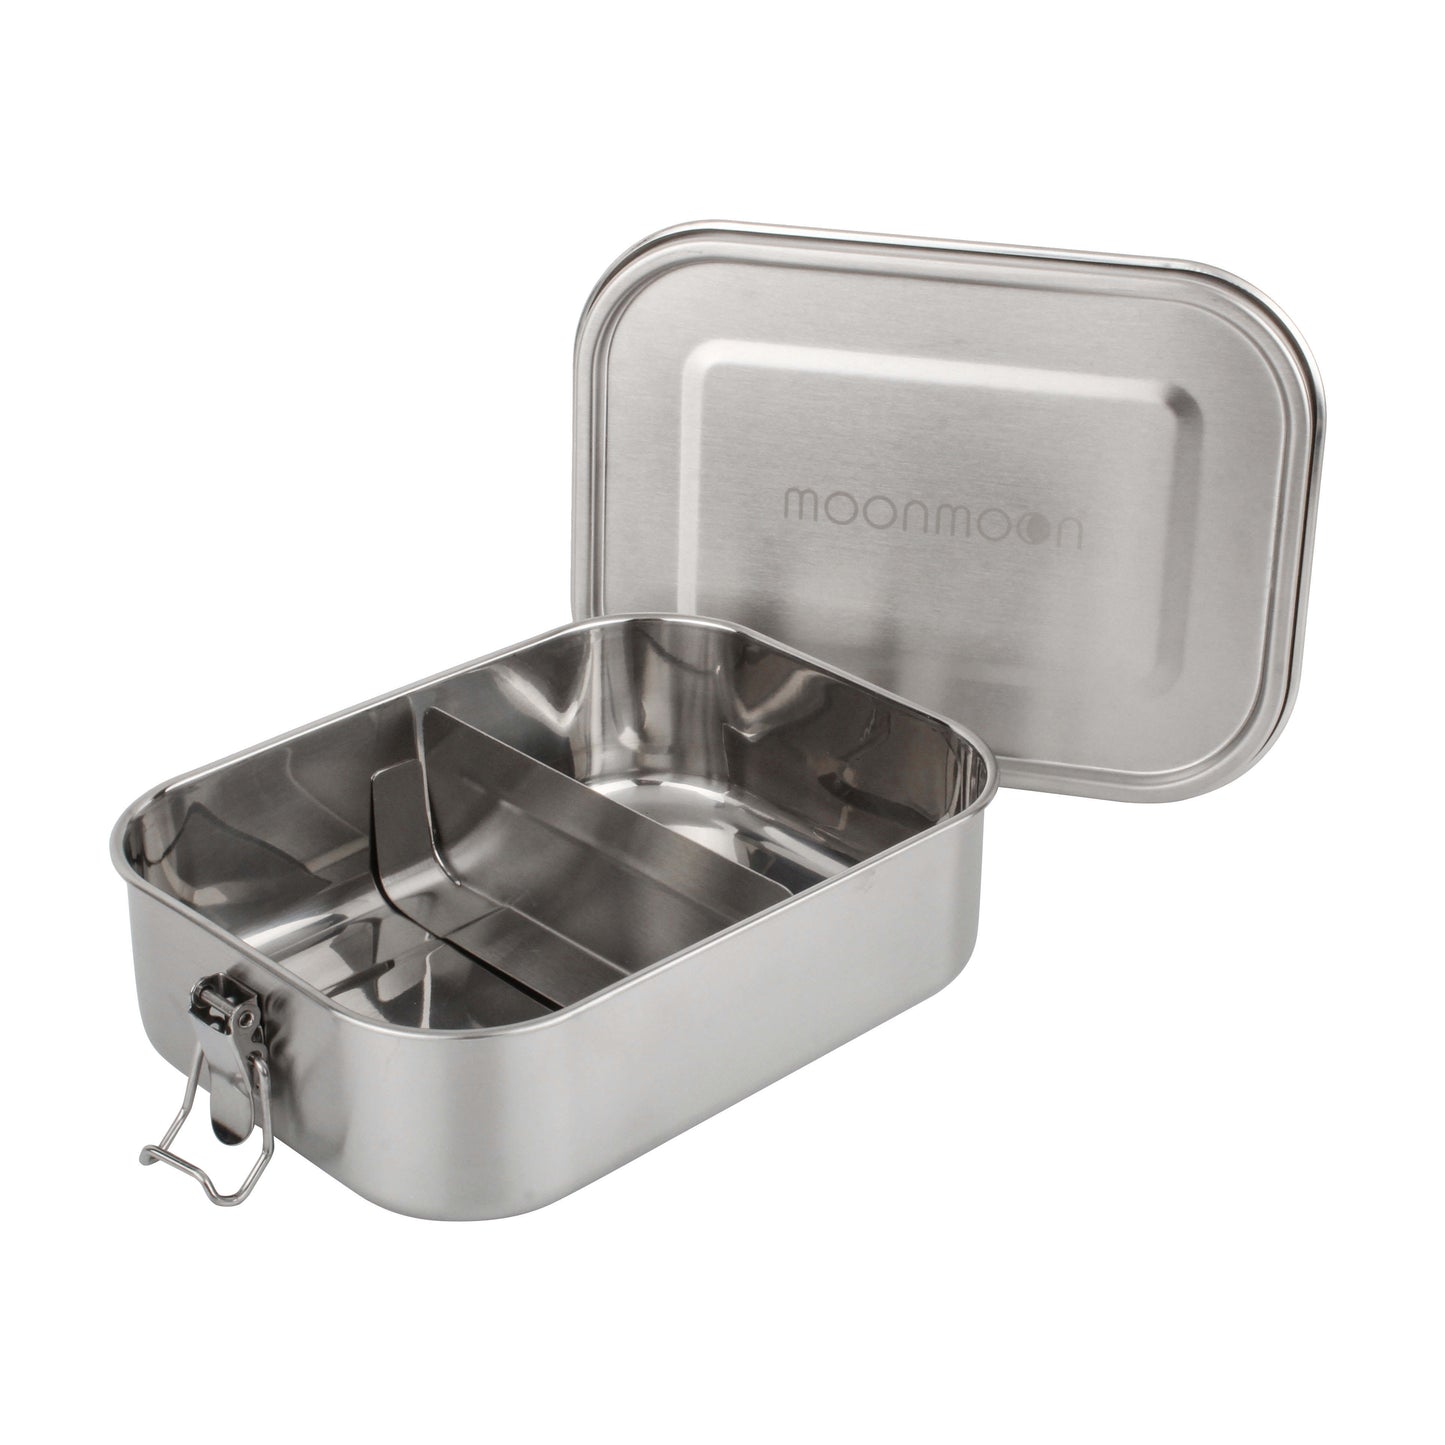 moonmoon stainless steel bento, eco friendly lunch box, bento boxes, leak proof stainless steel lunch box uk, lunch box metal, lunch box with divider metal lunch box with dividers bento box with removable dividers